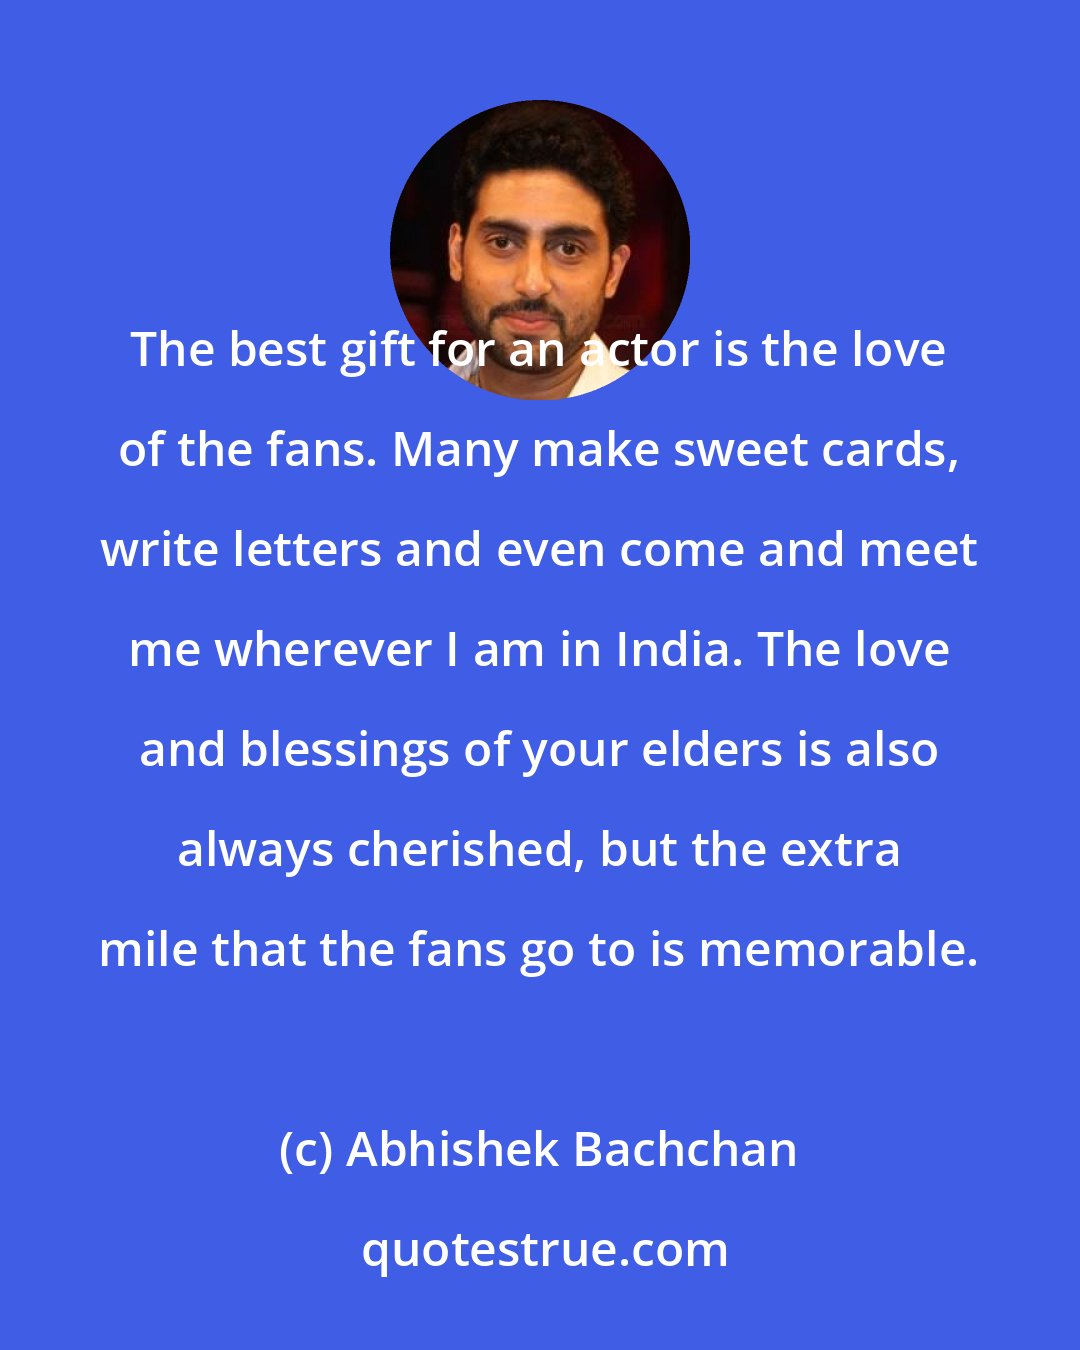 Abhishek Bachchan: The best gift for an actor is the love of the fans. Many make sweet cards, write letters and even come and meet me wherever I am in India. The love and blessings of your elders is also always cherished, but the extra mile that the fans go to is memorable.